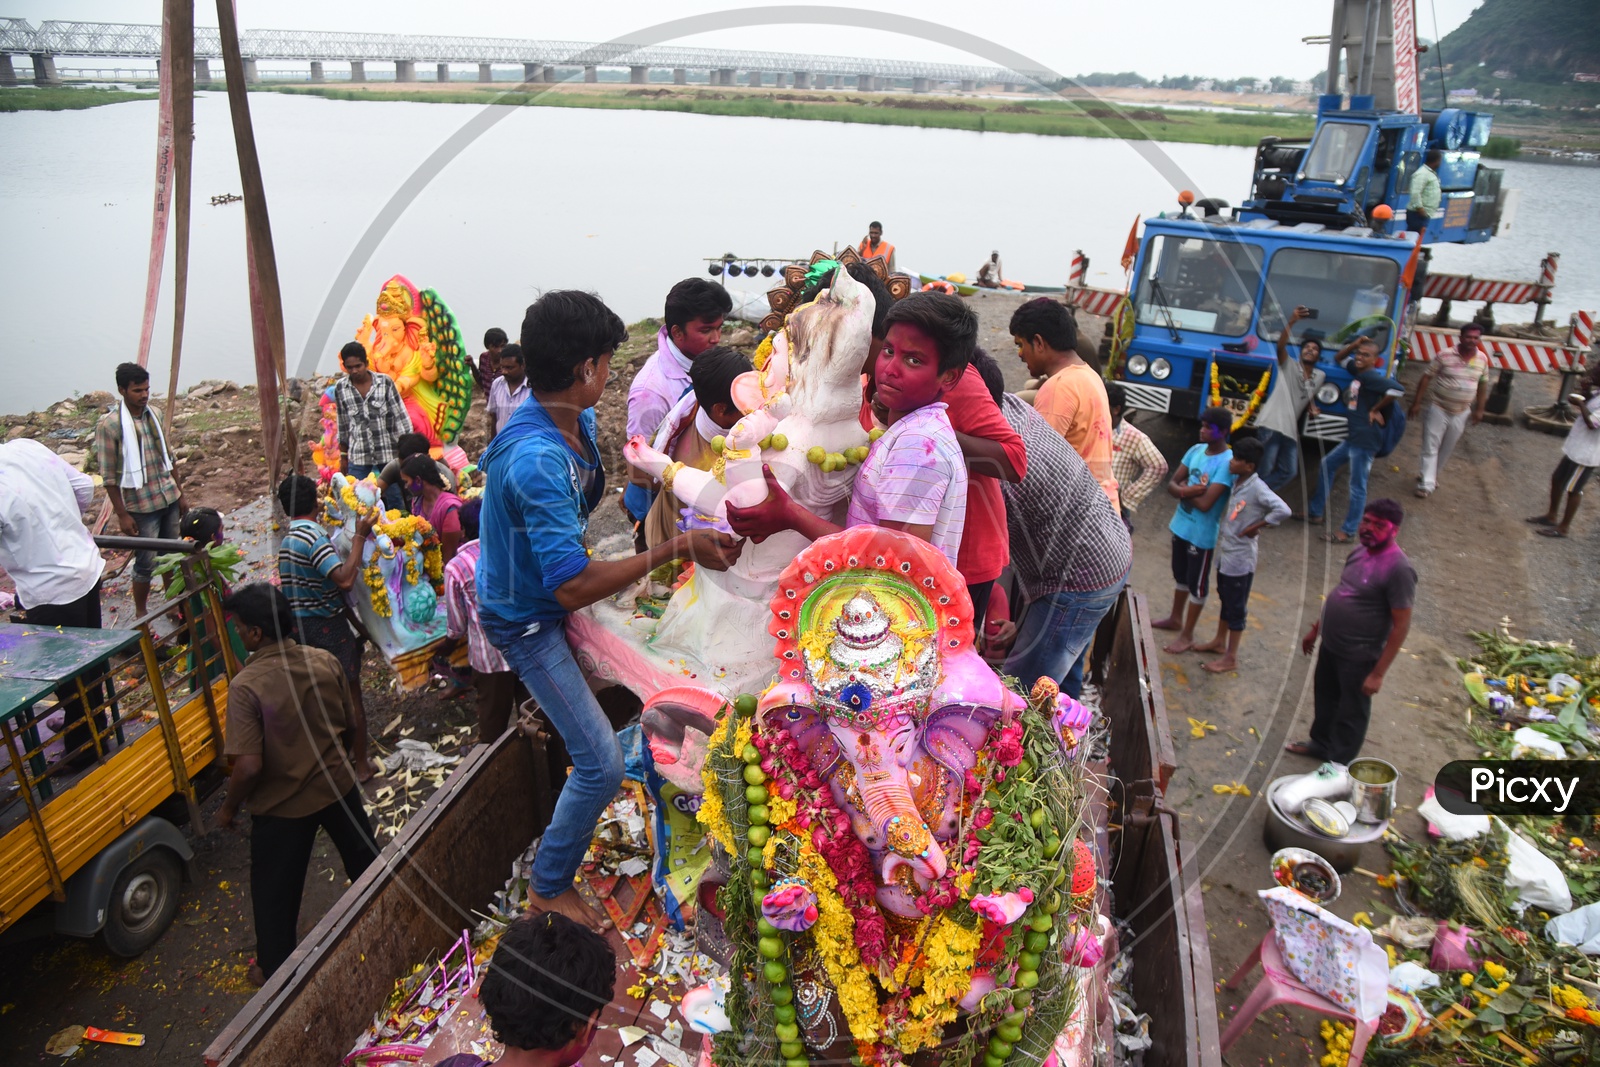 Kids unloading the Ganesha Idol from the truck